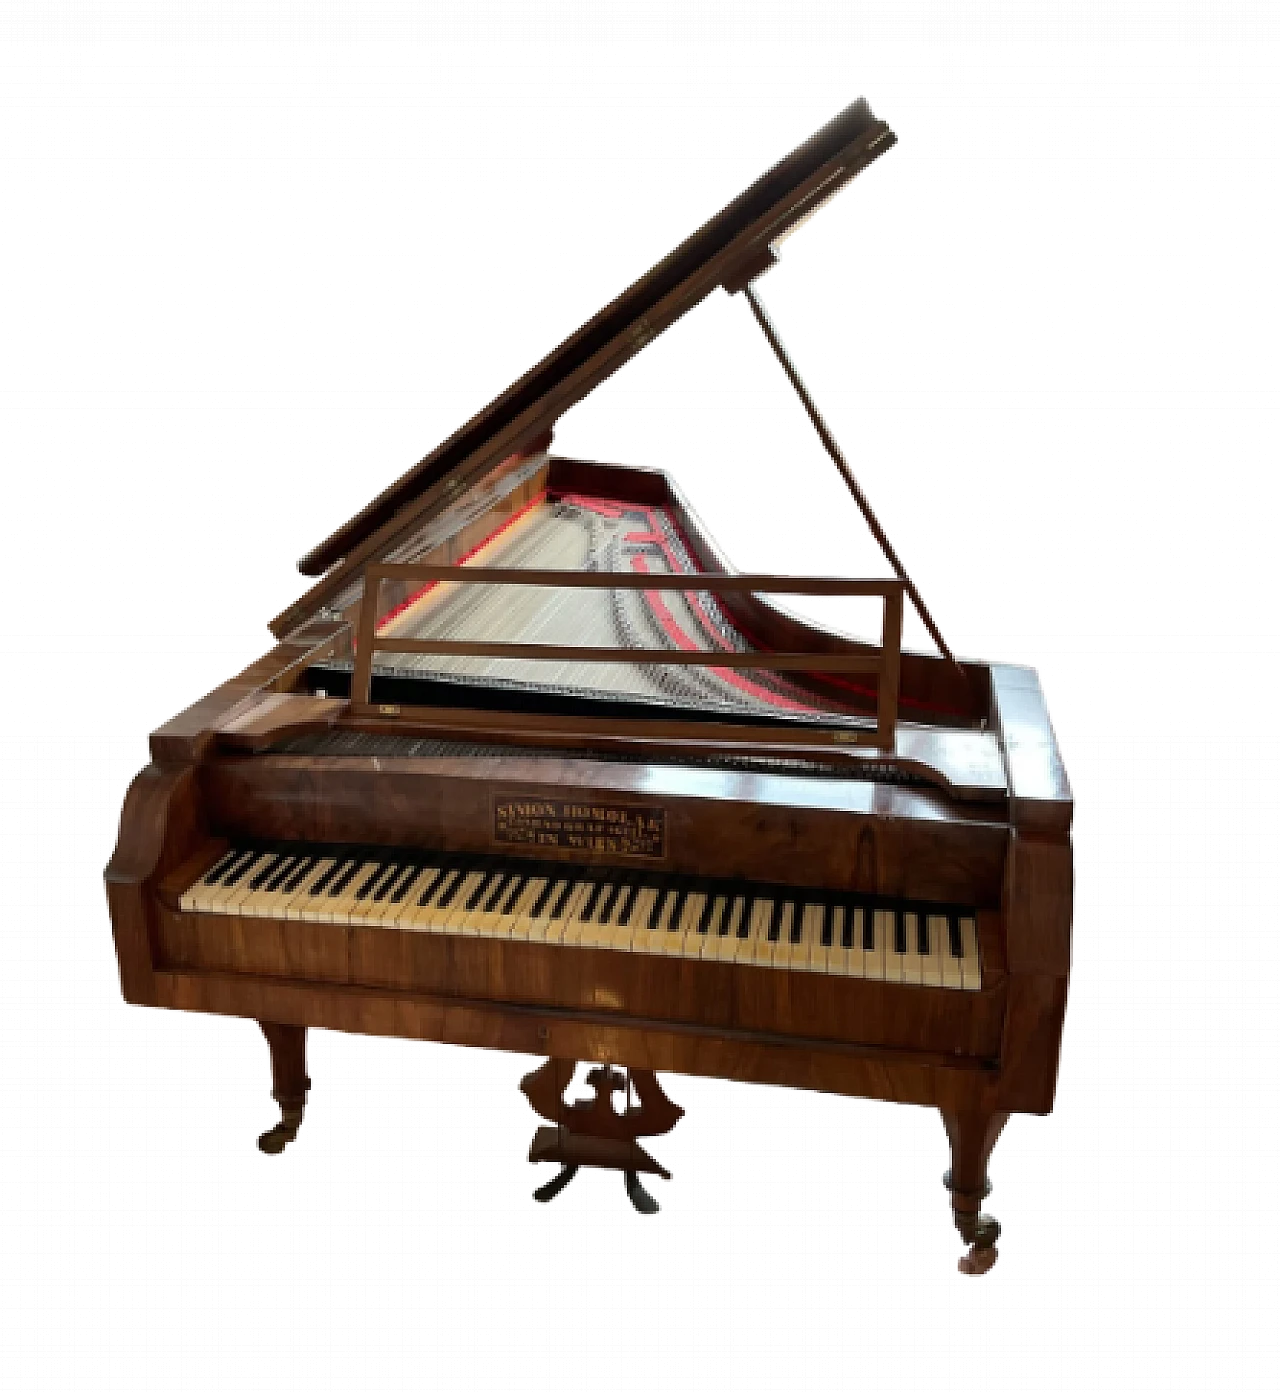 Grand piano by Simon Homolak, first quarter of the 19th century 5